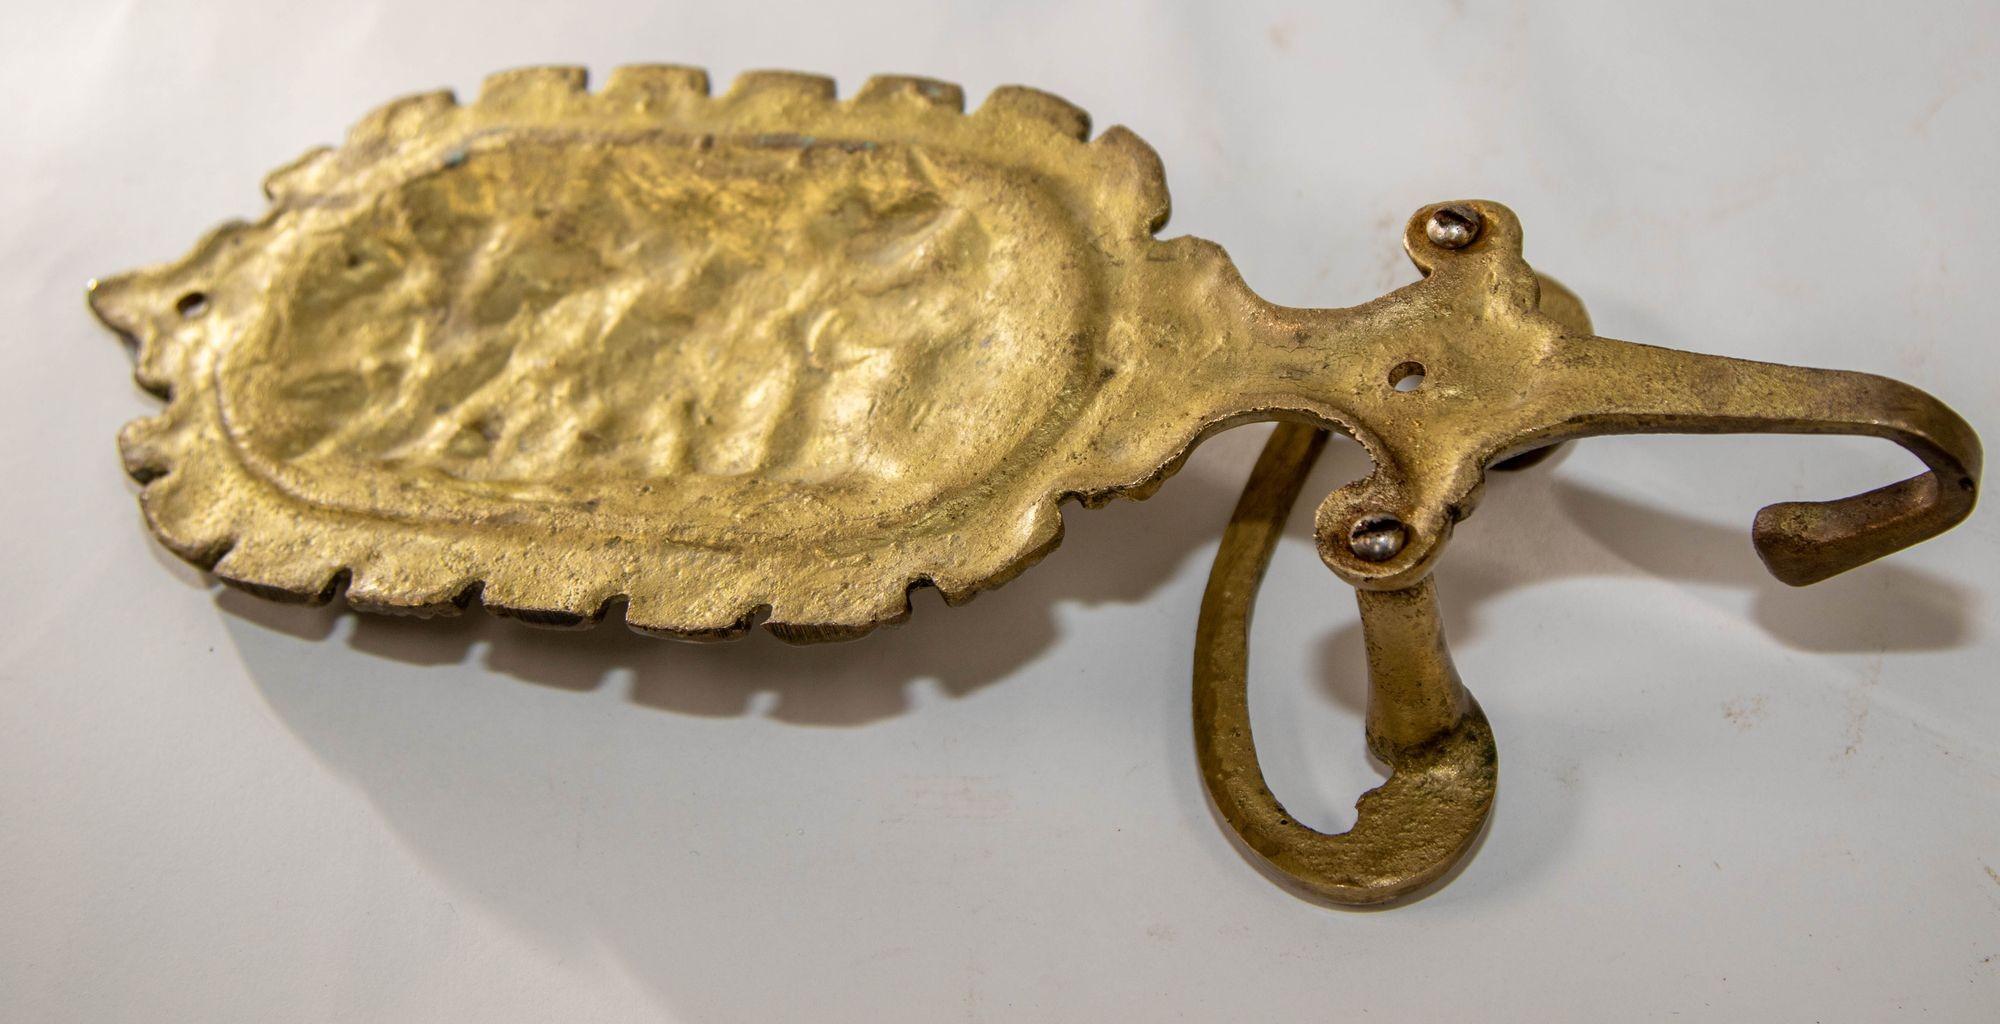 Architectural Italian Cast Brass Floral Wall Hook Decor Made in Italy 3